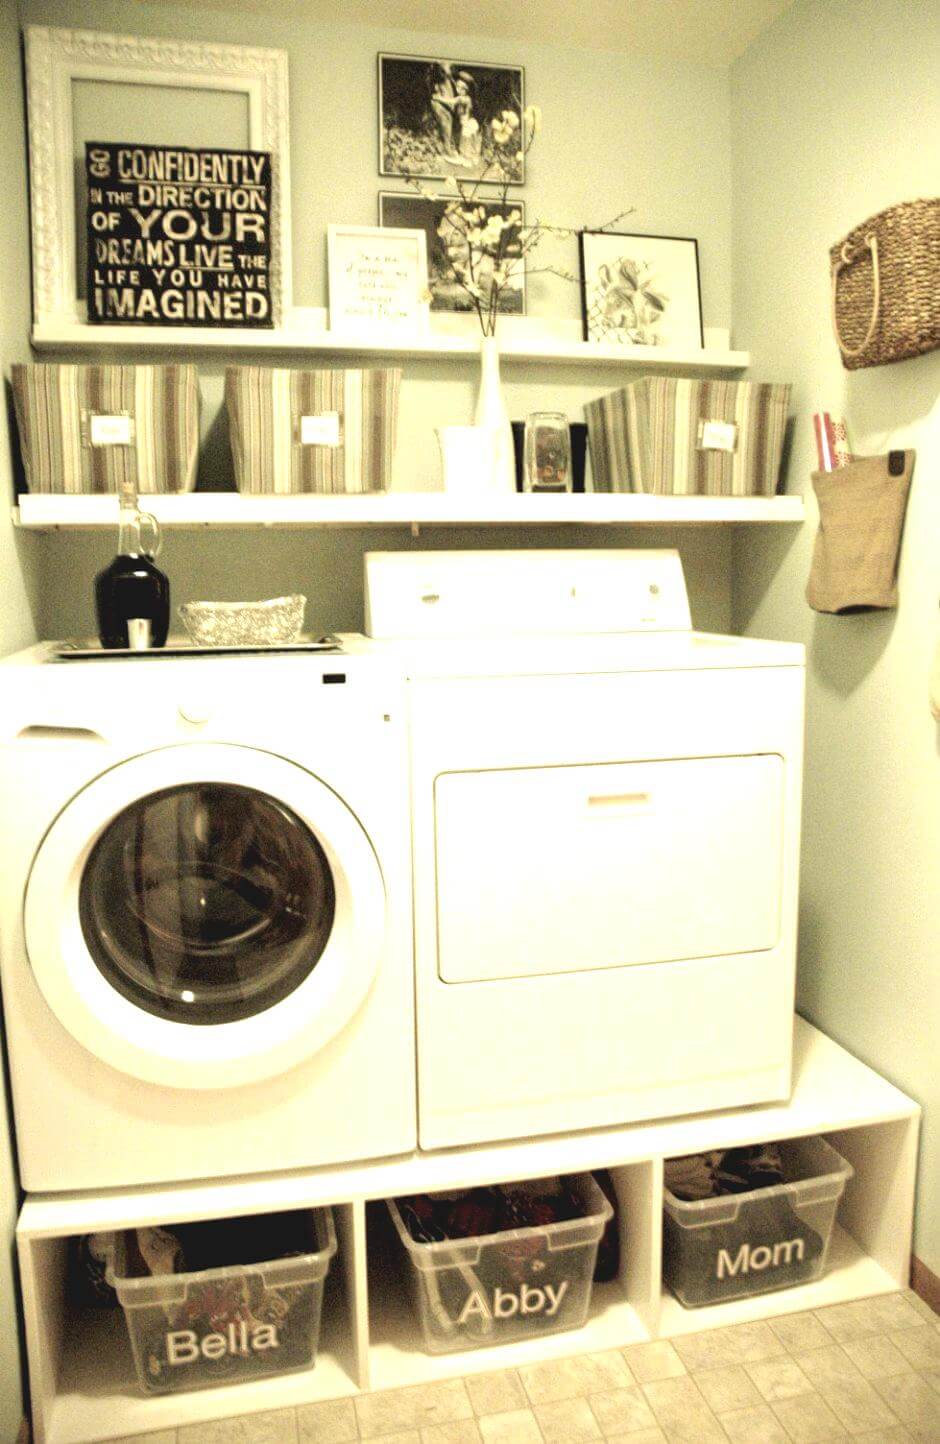 Very Small Laundry Room Ideas - Labeled Plastic Containers for A More Organized Laundry Room - Harptimes.com